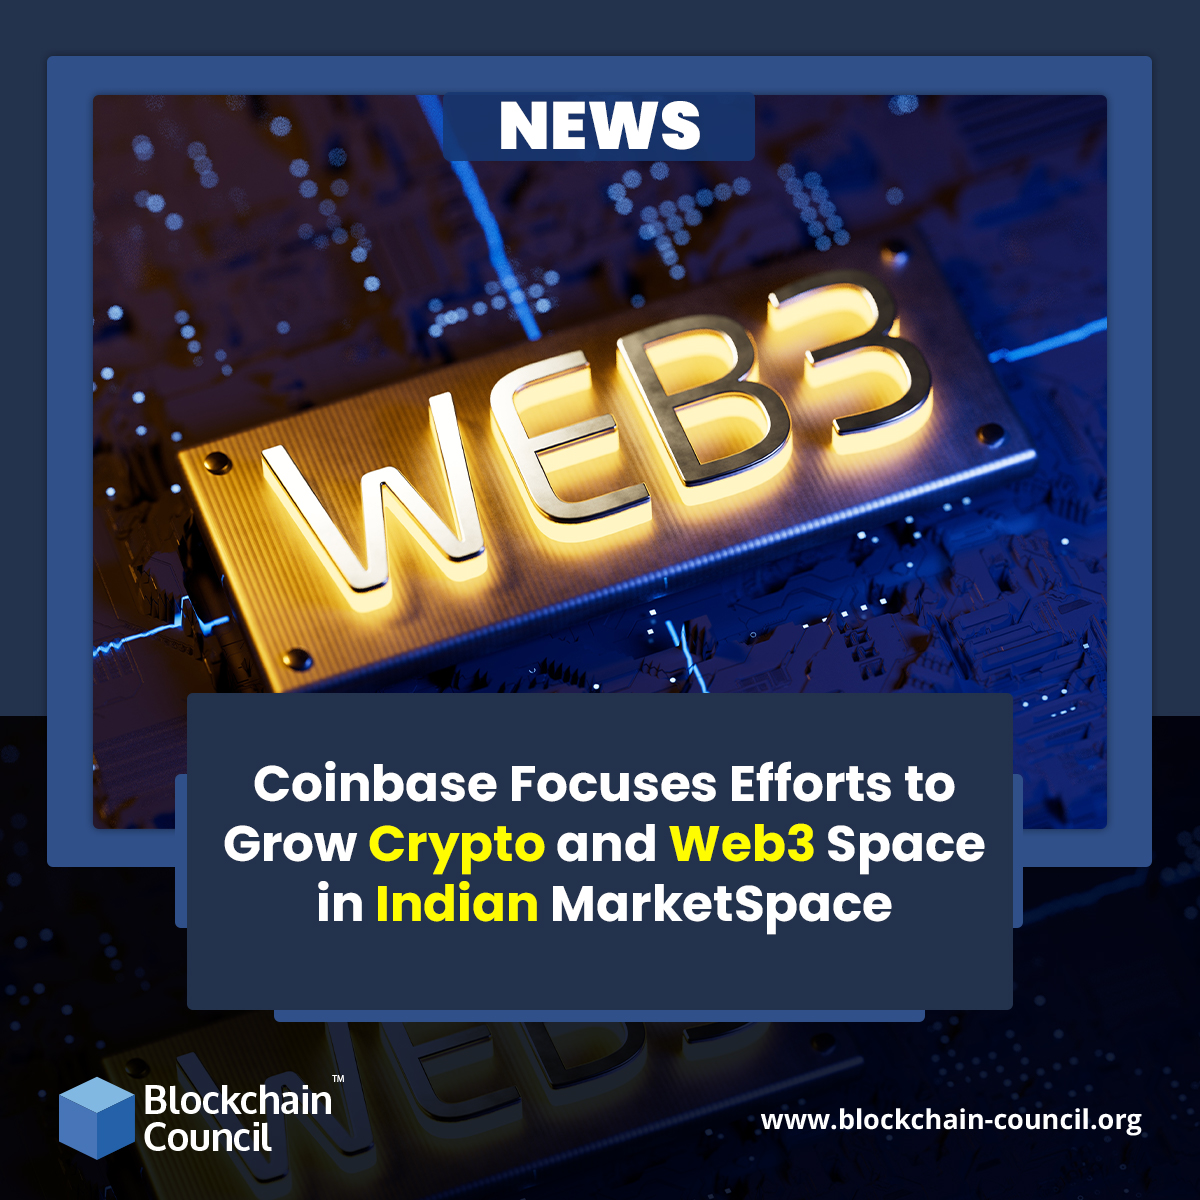 Coinbase Focuses Efforts to Grow Crypto and Web3 Space in Indian MarketSpace